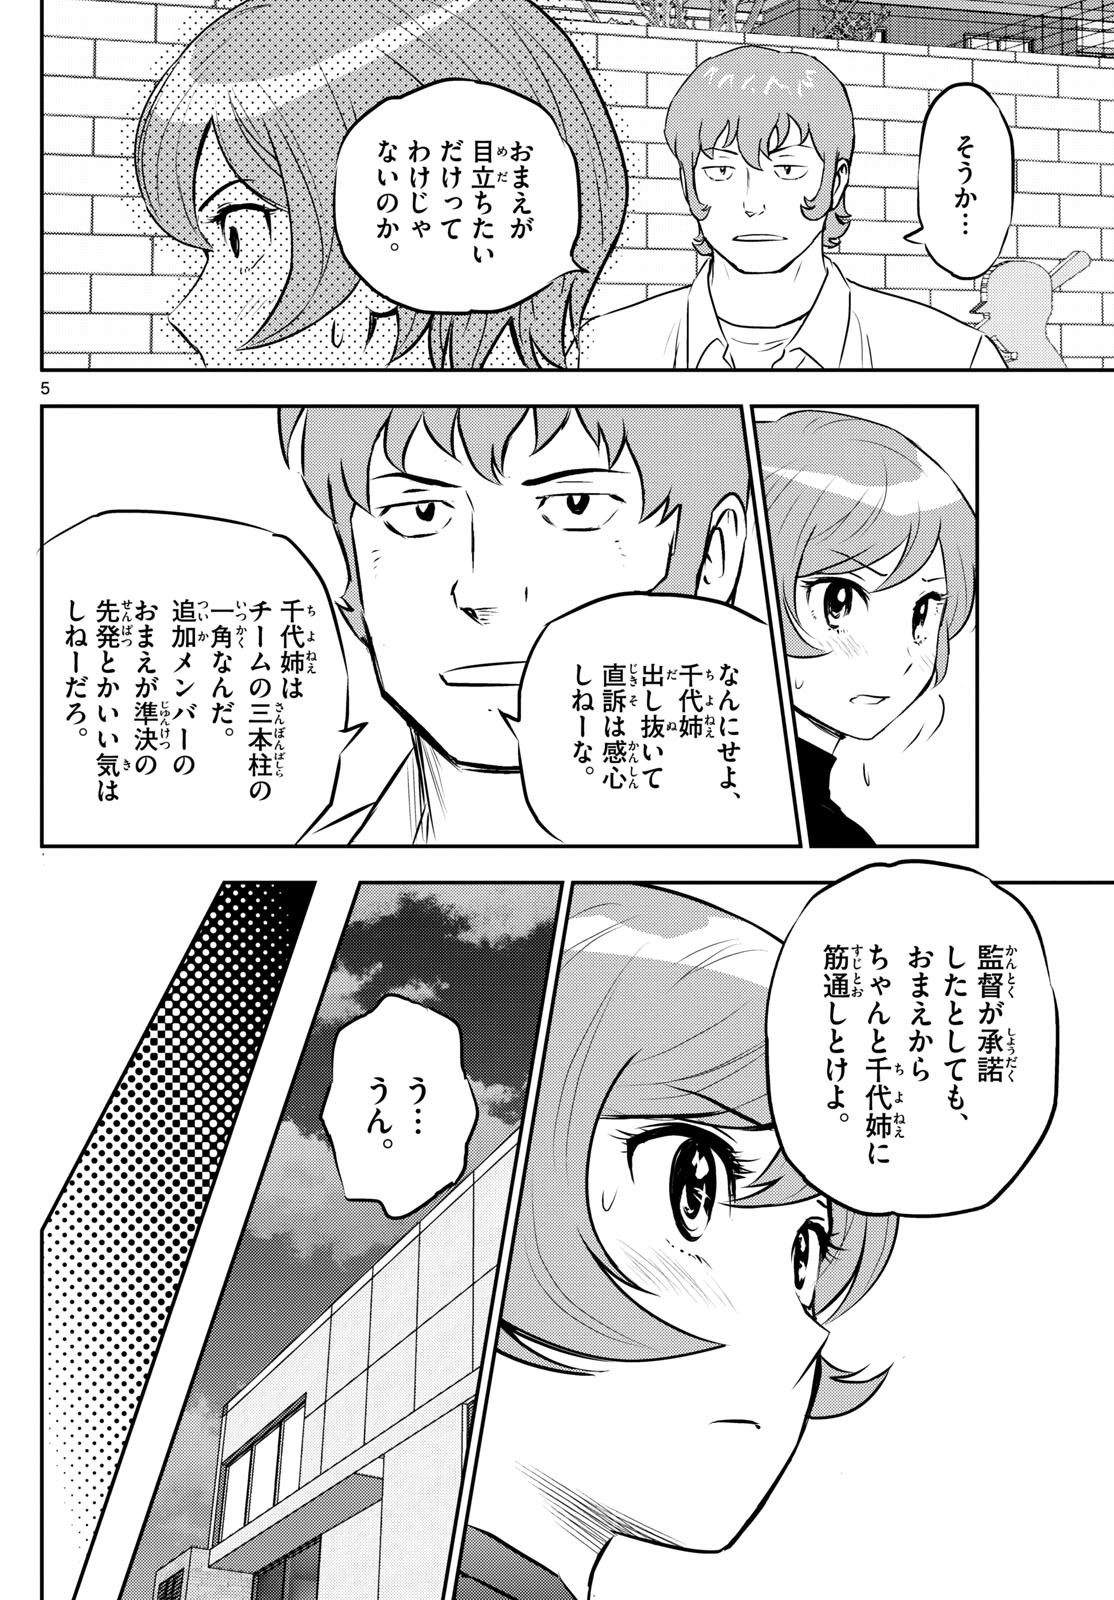 Major 2nd - メジャーセカンド - Chapter 279 - Page 6